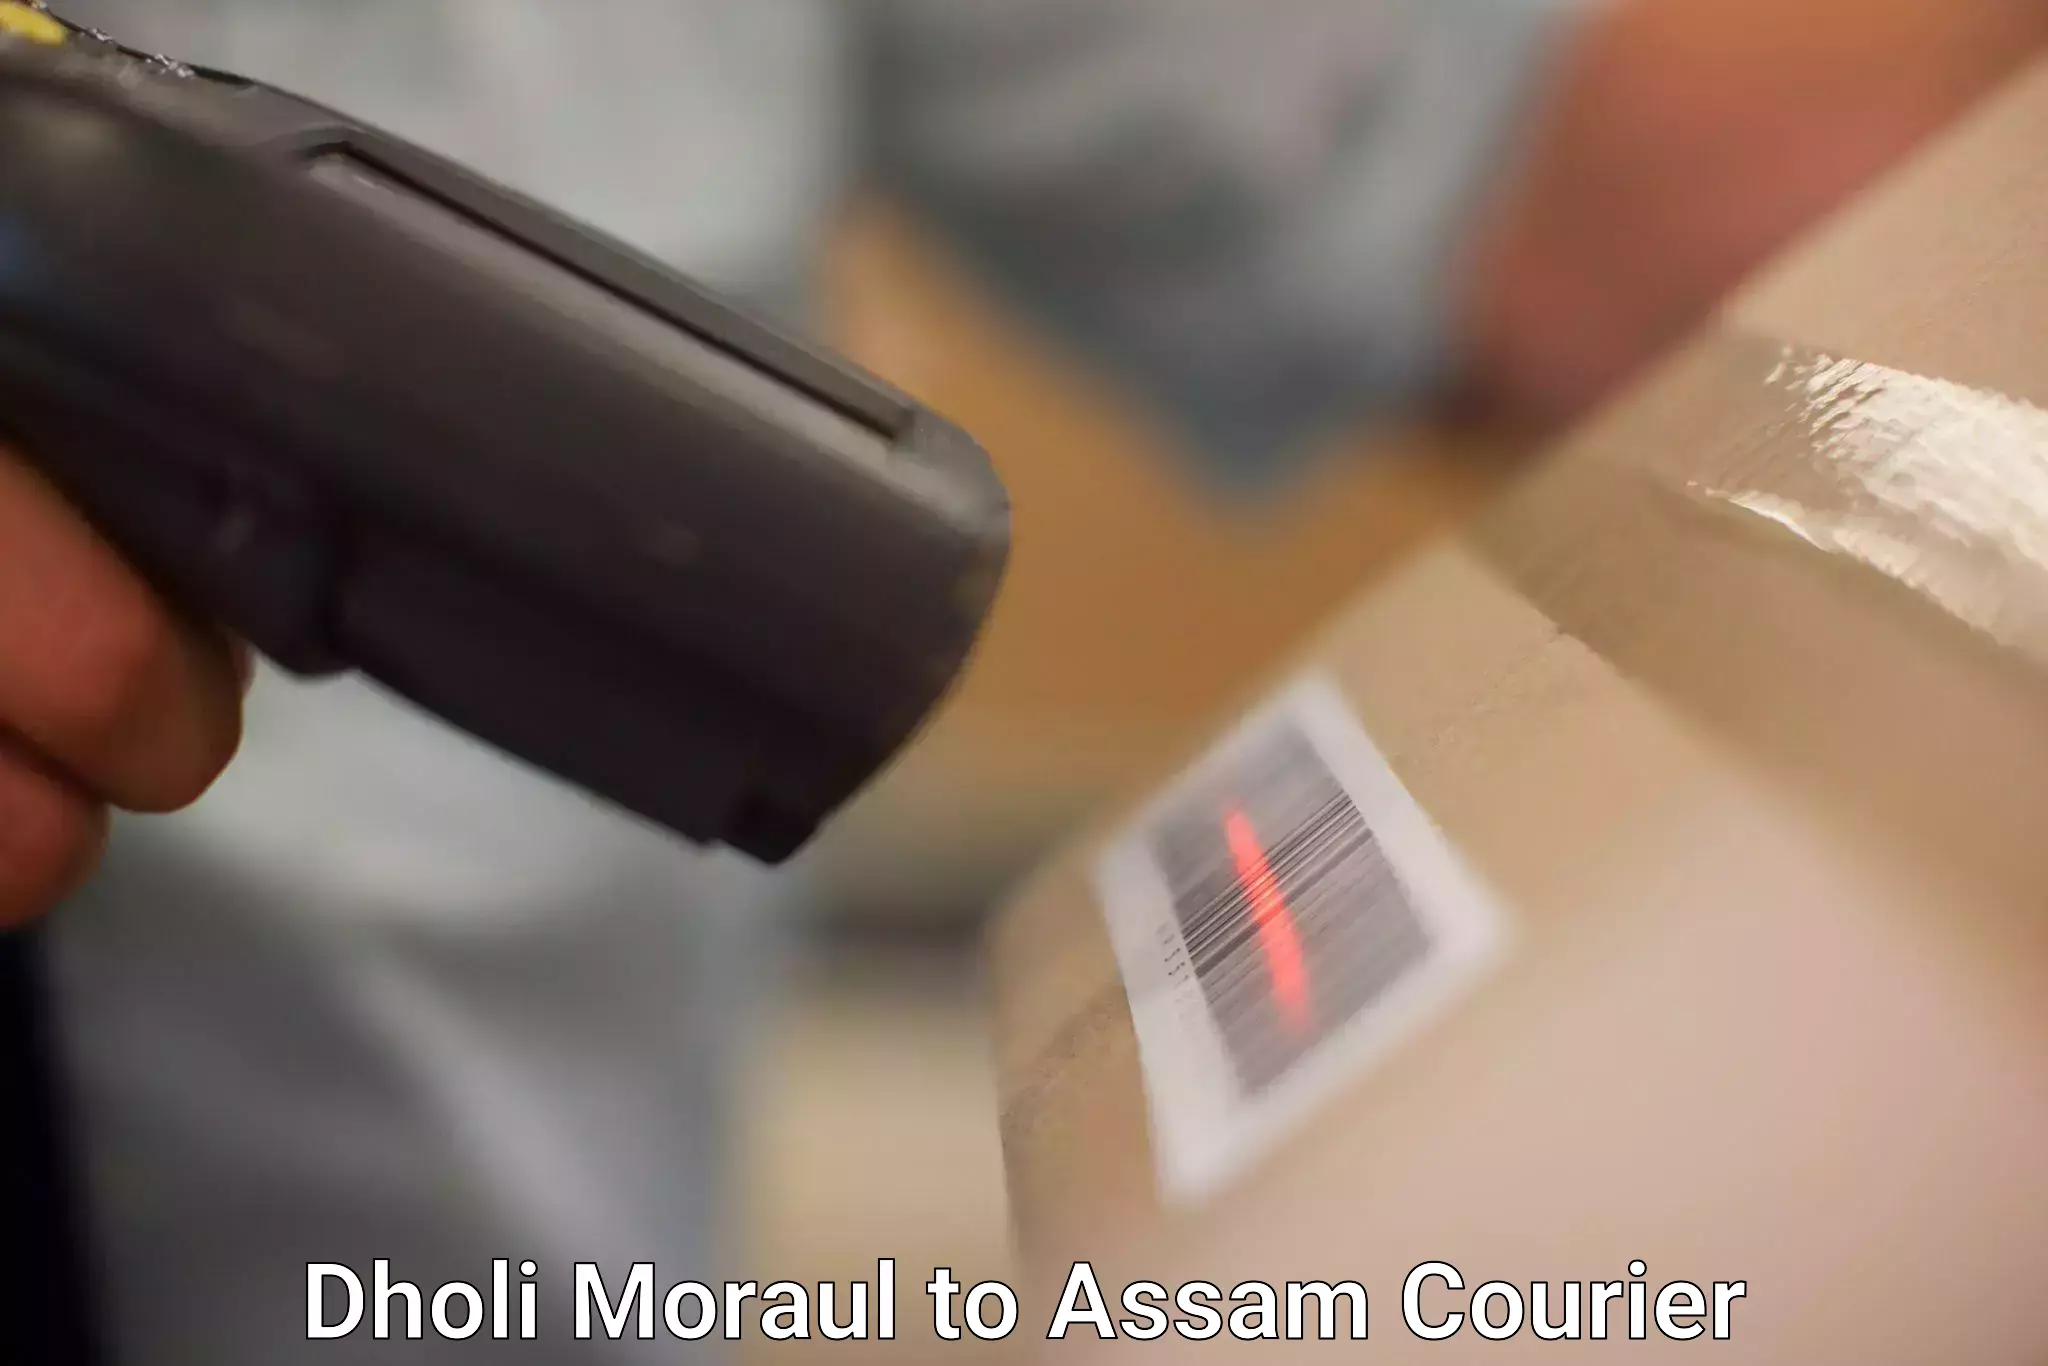 Global shipping solutions Dholi Moraul to Assam